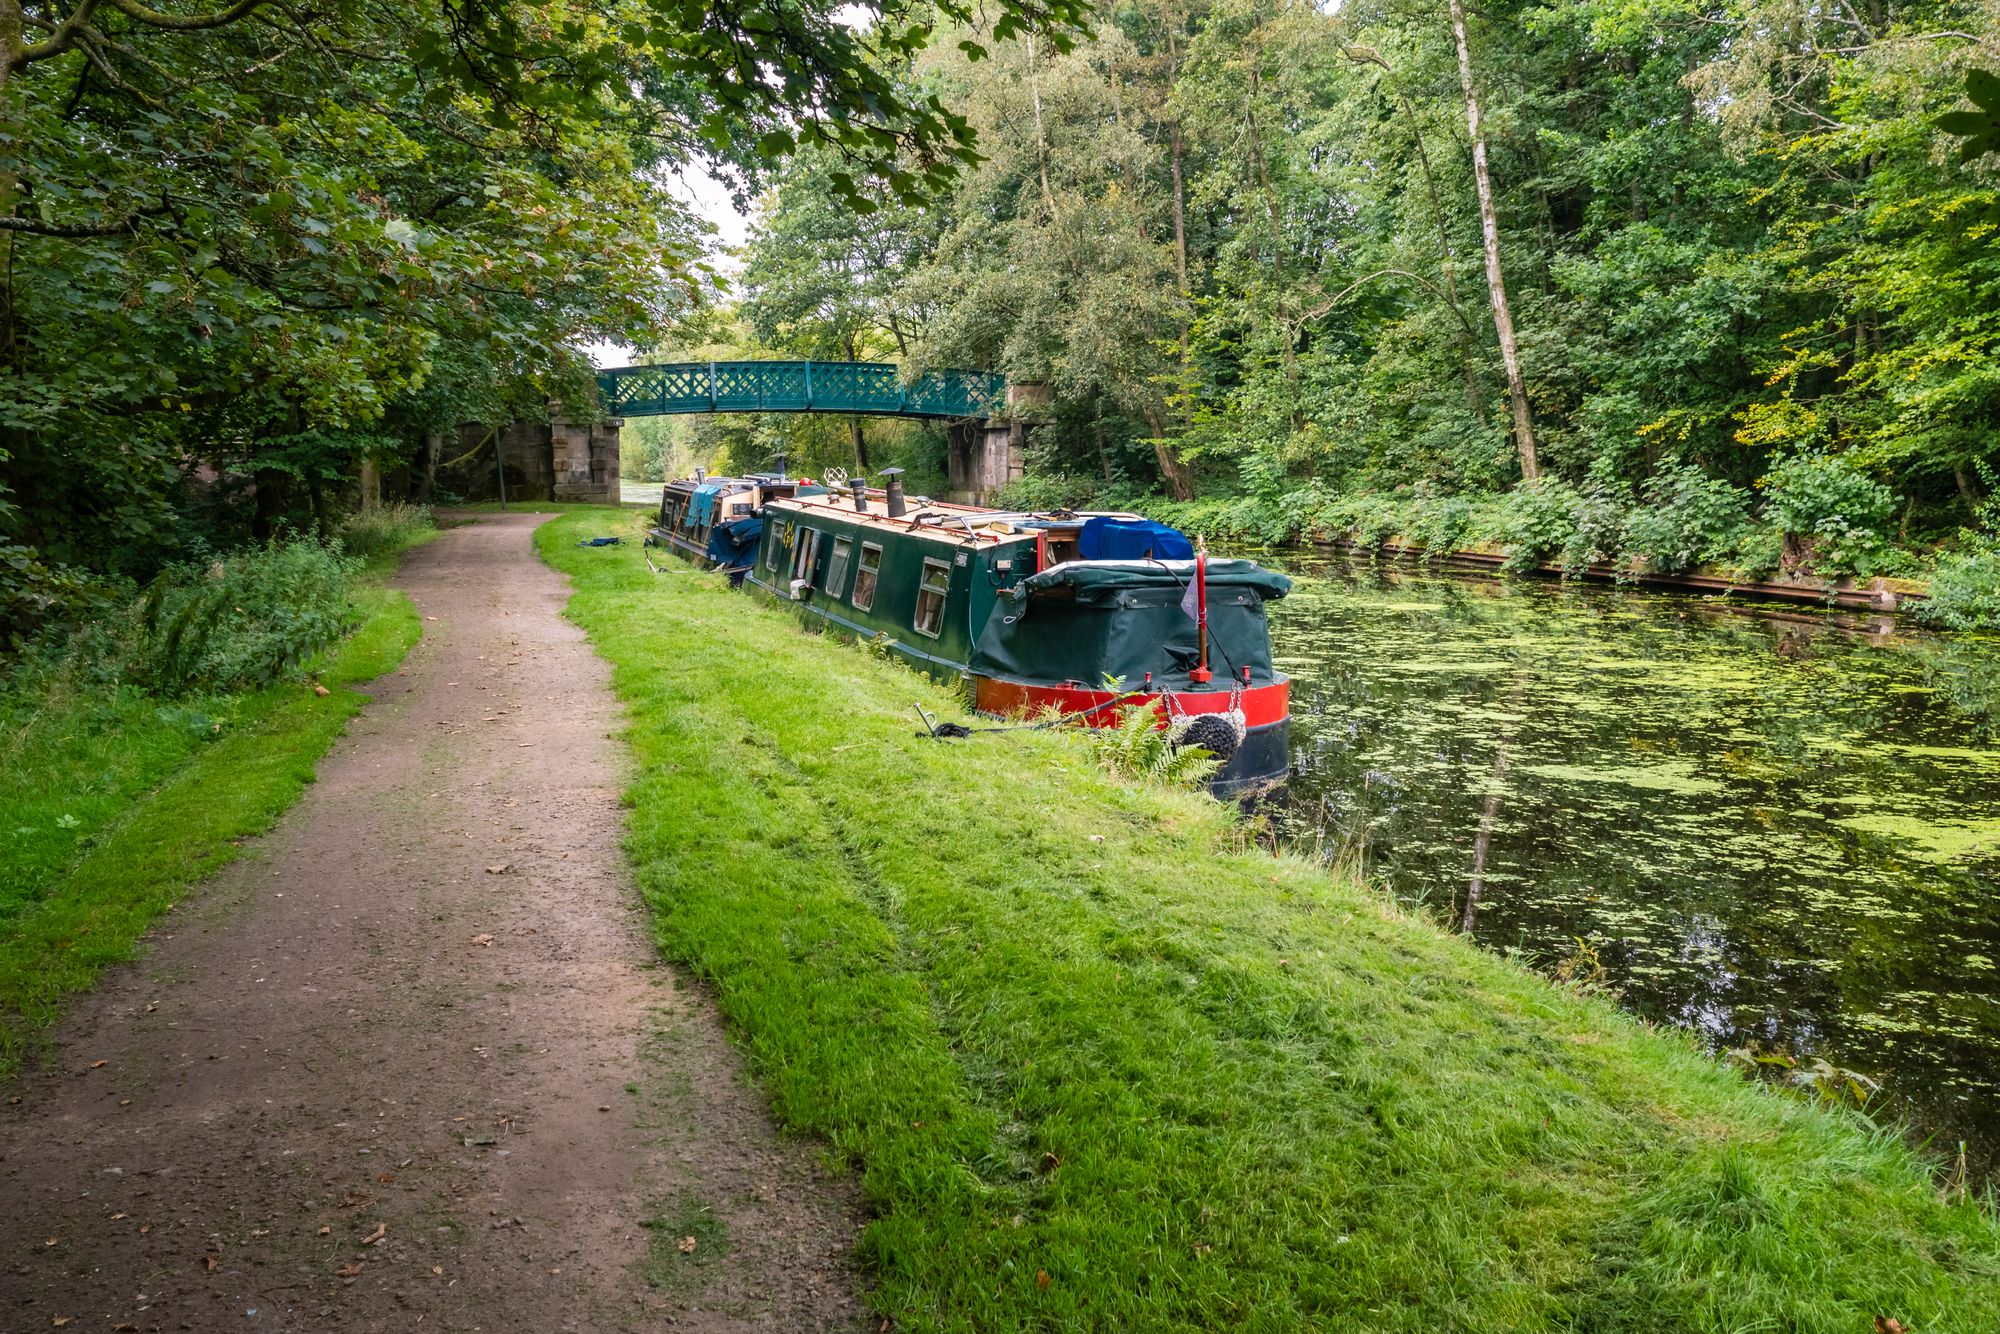 Canal boat on Leeds-Liverpool canal in Skipton